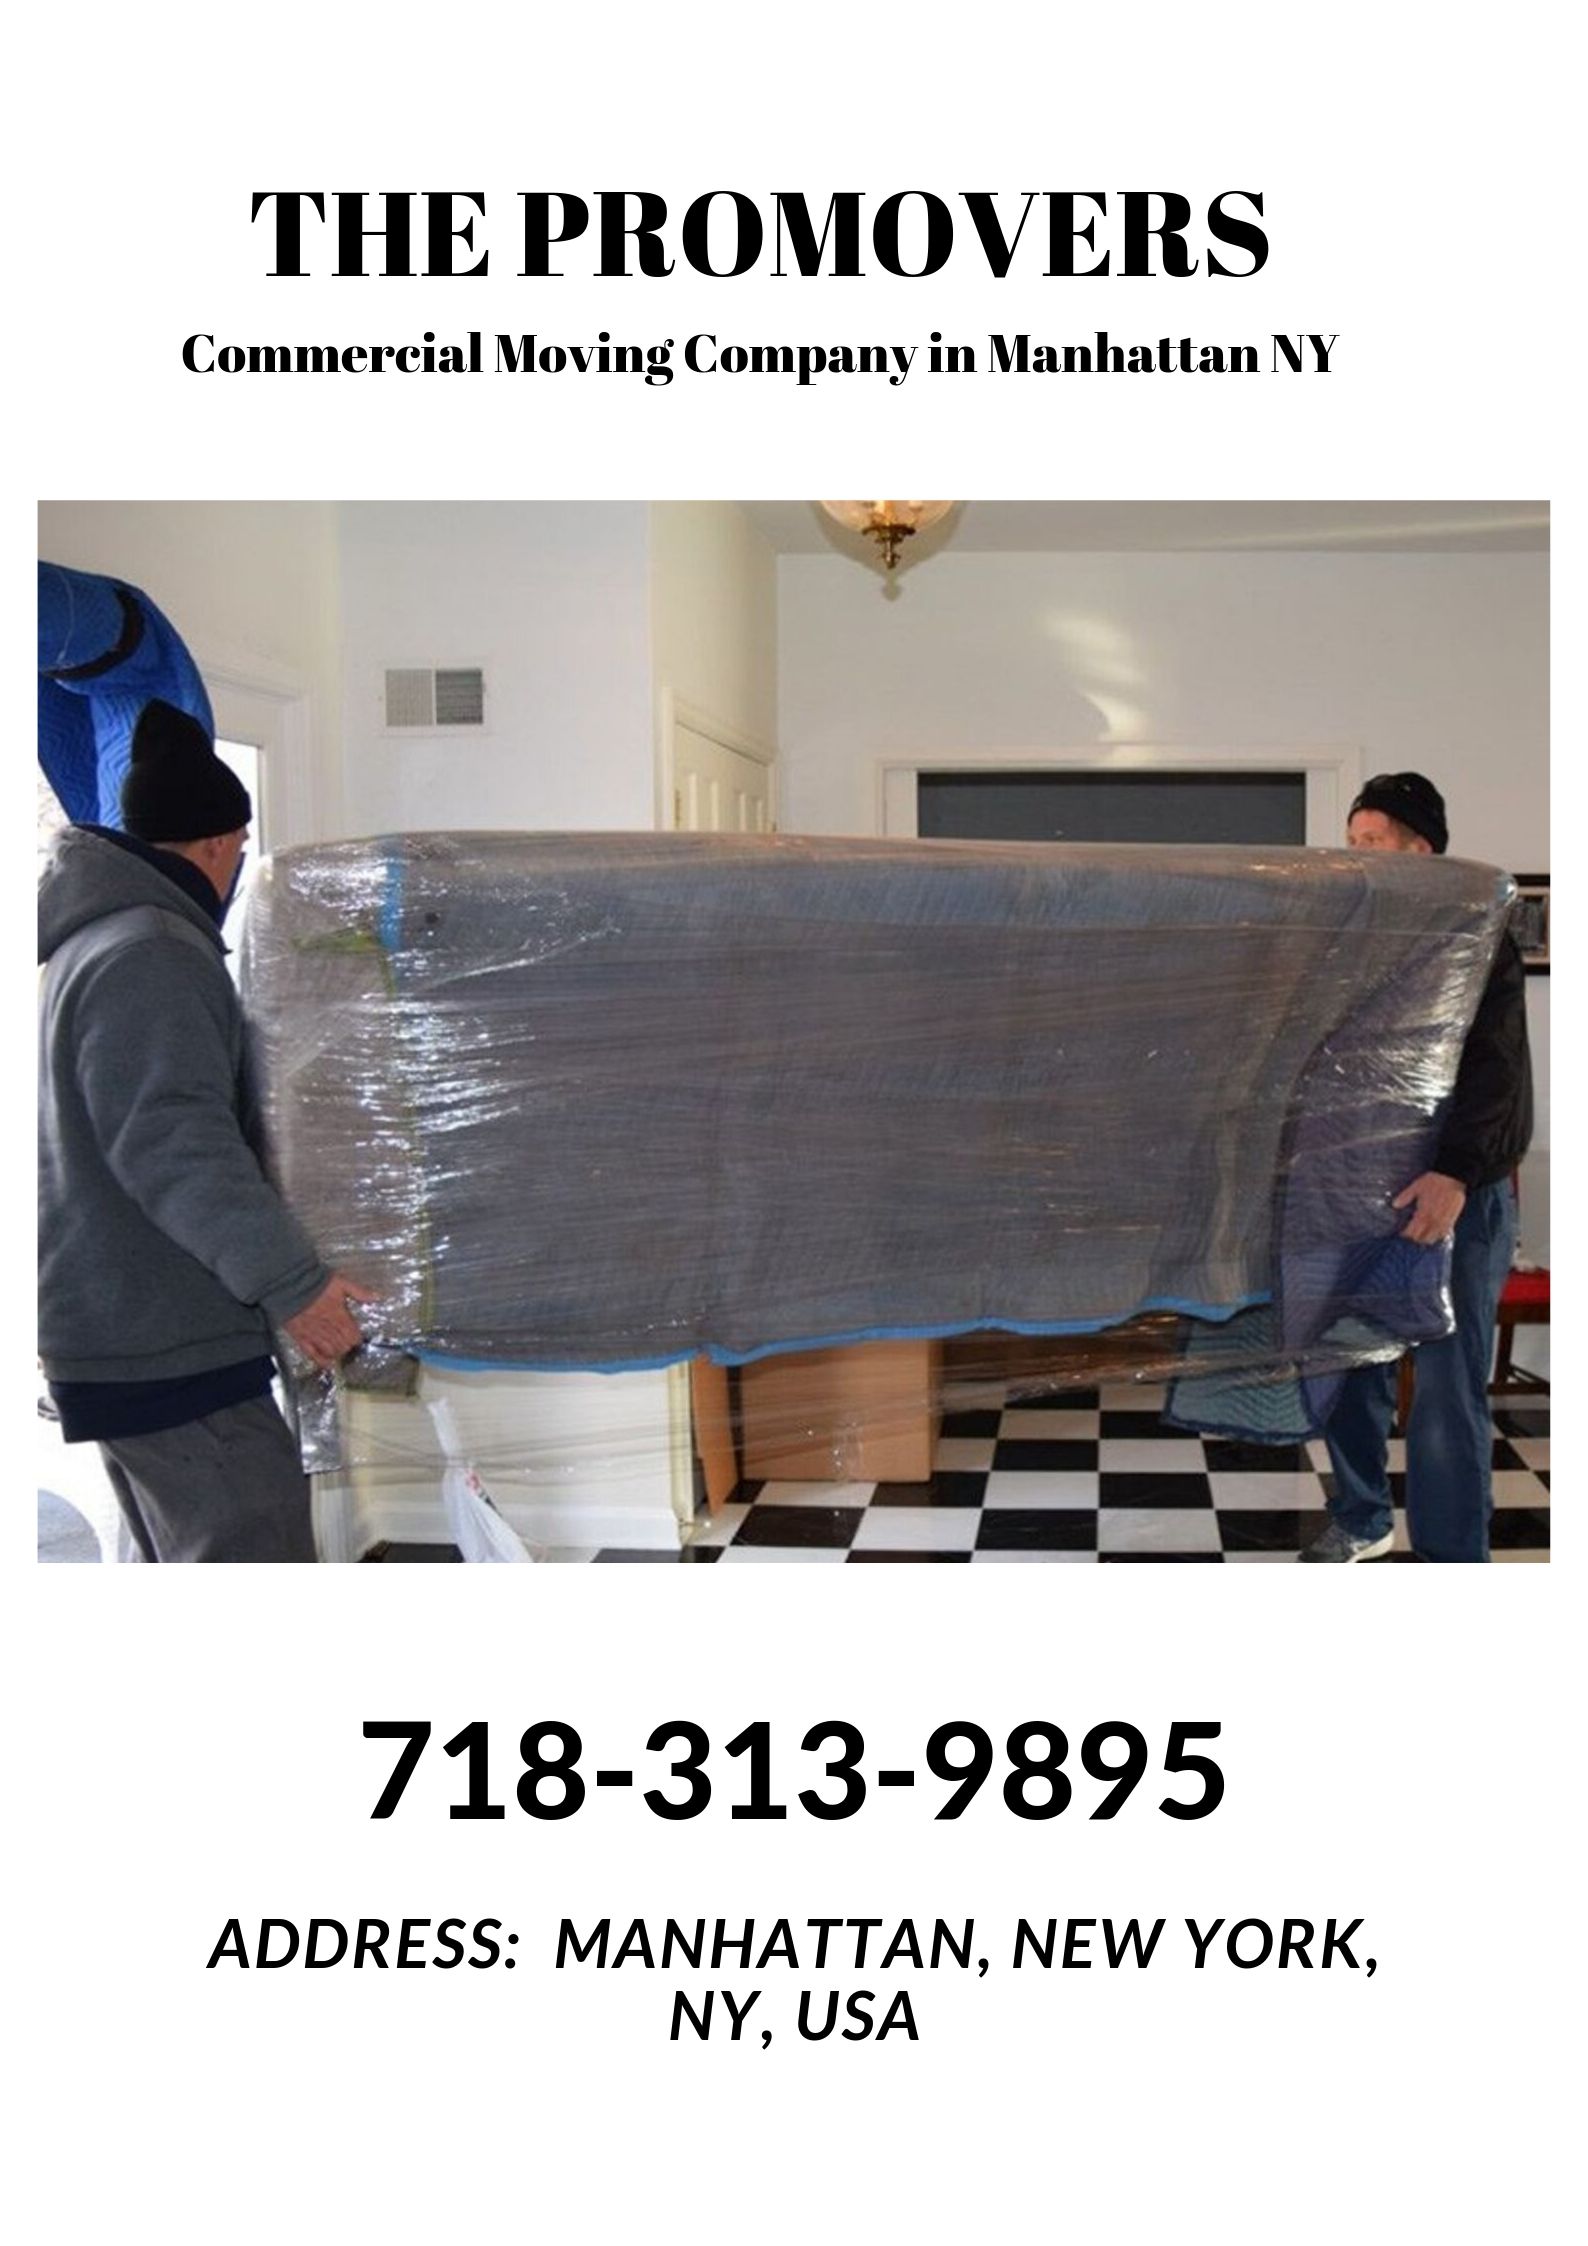 Affordable Local Moving in Manhattan NY